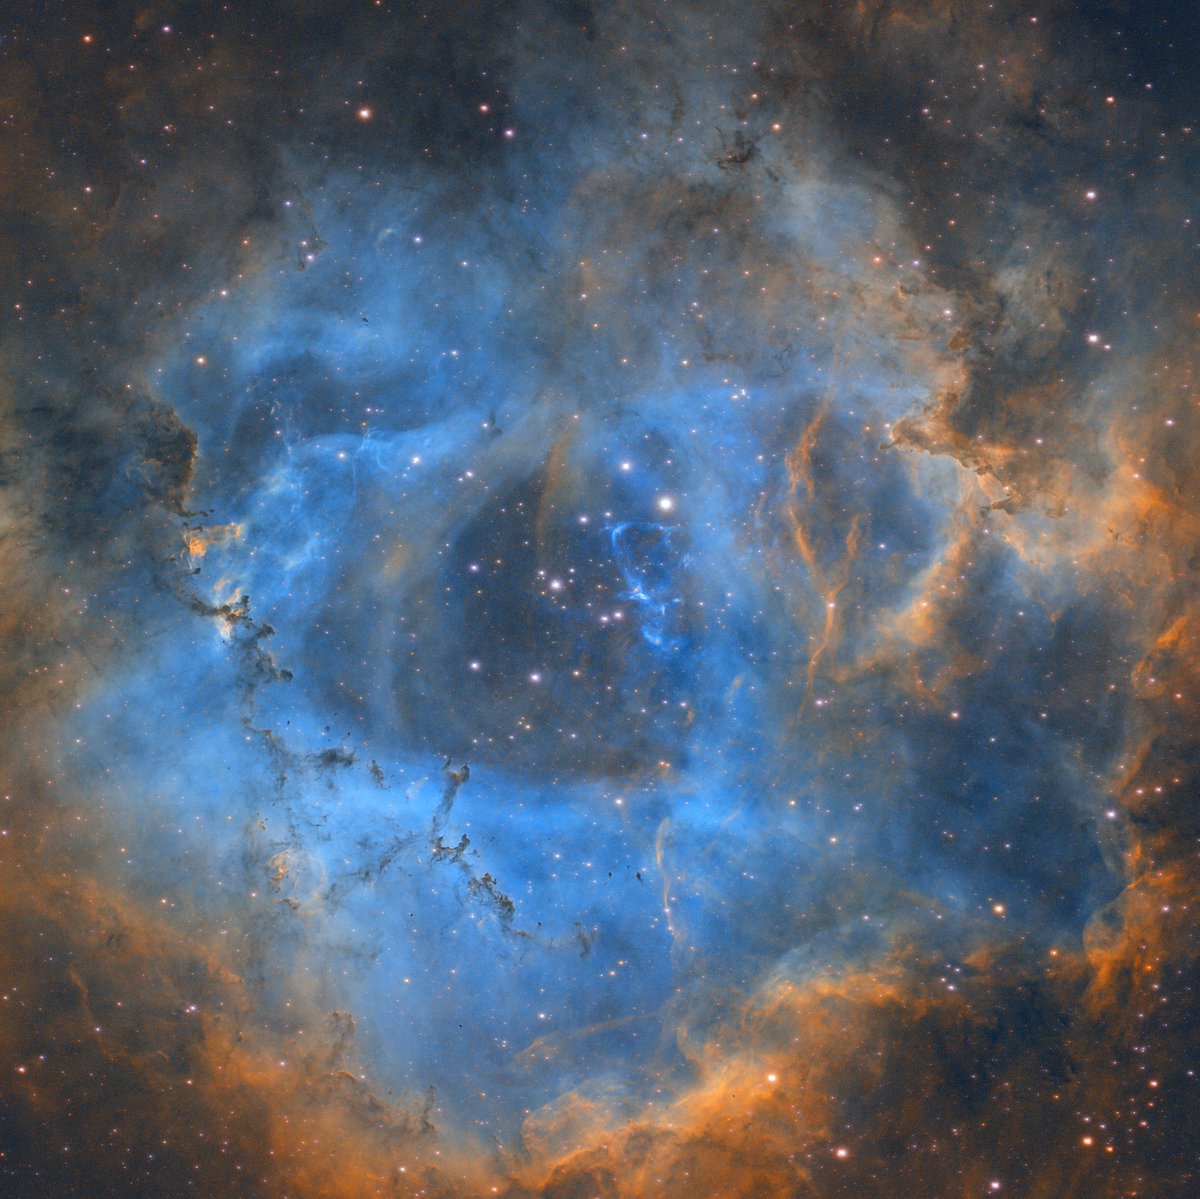 Going deep into Rosette.

Here's 9 hours of data I took on the Rosette Nebula taken with my Apertura 72 EDR scope. 

#astronomy #astrophotography #telescope #space #stars #backyardastronomy